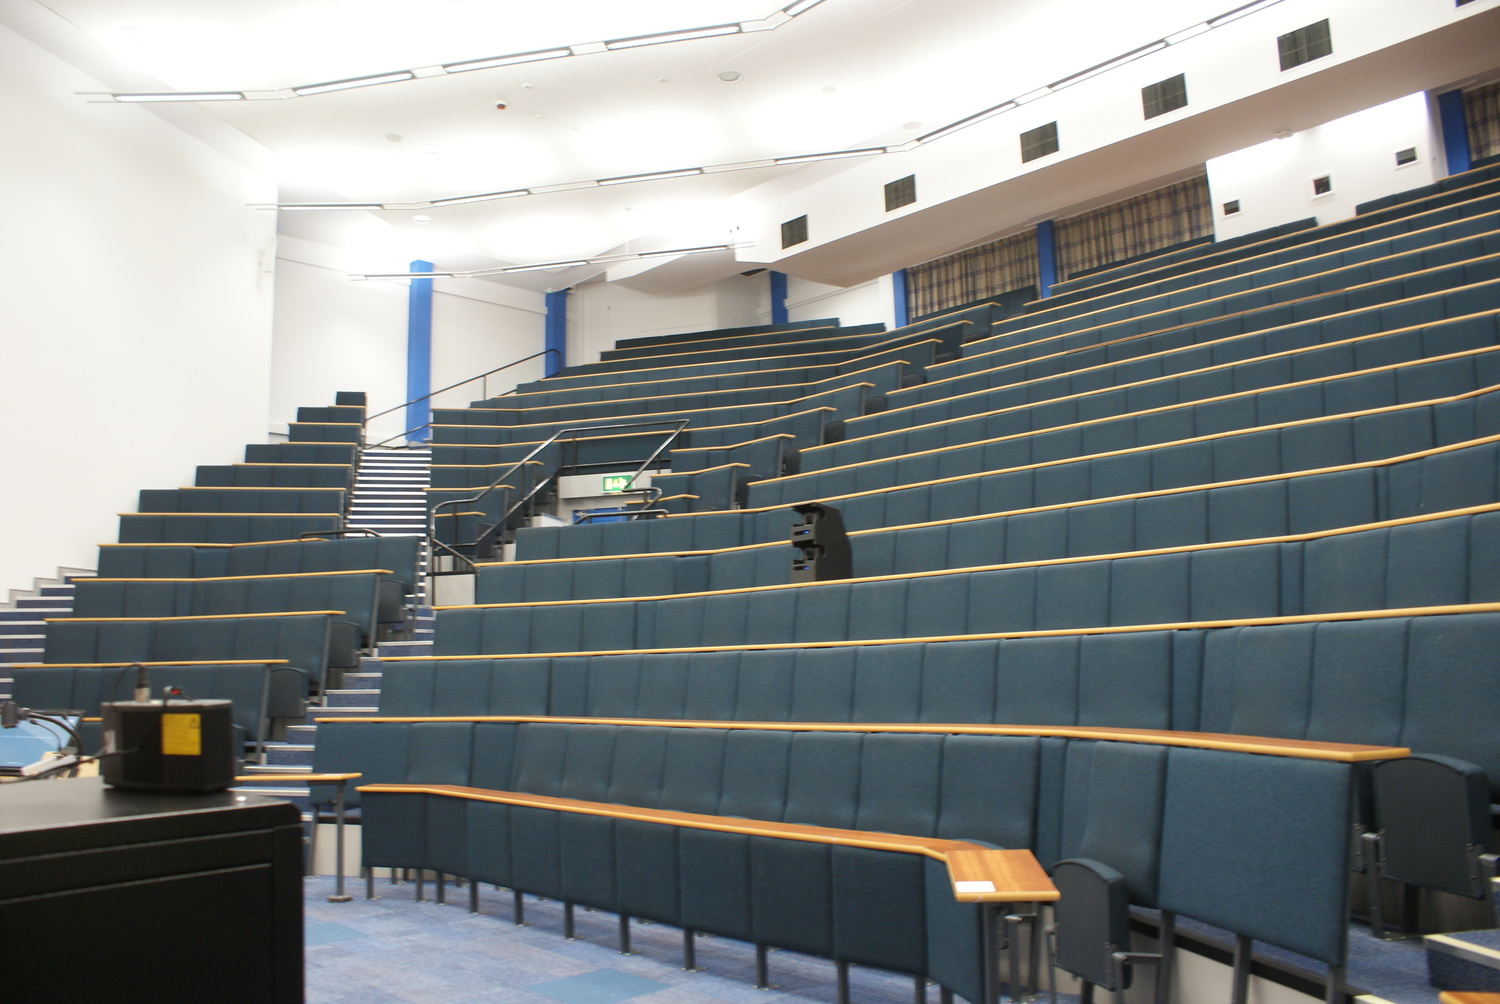  Conference Auditorium - CTS 2014 